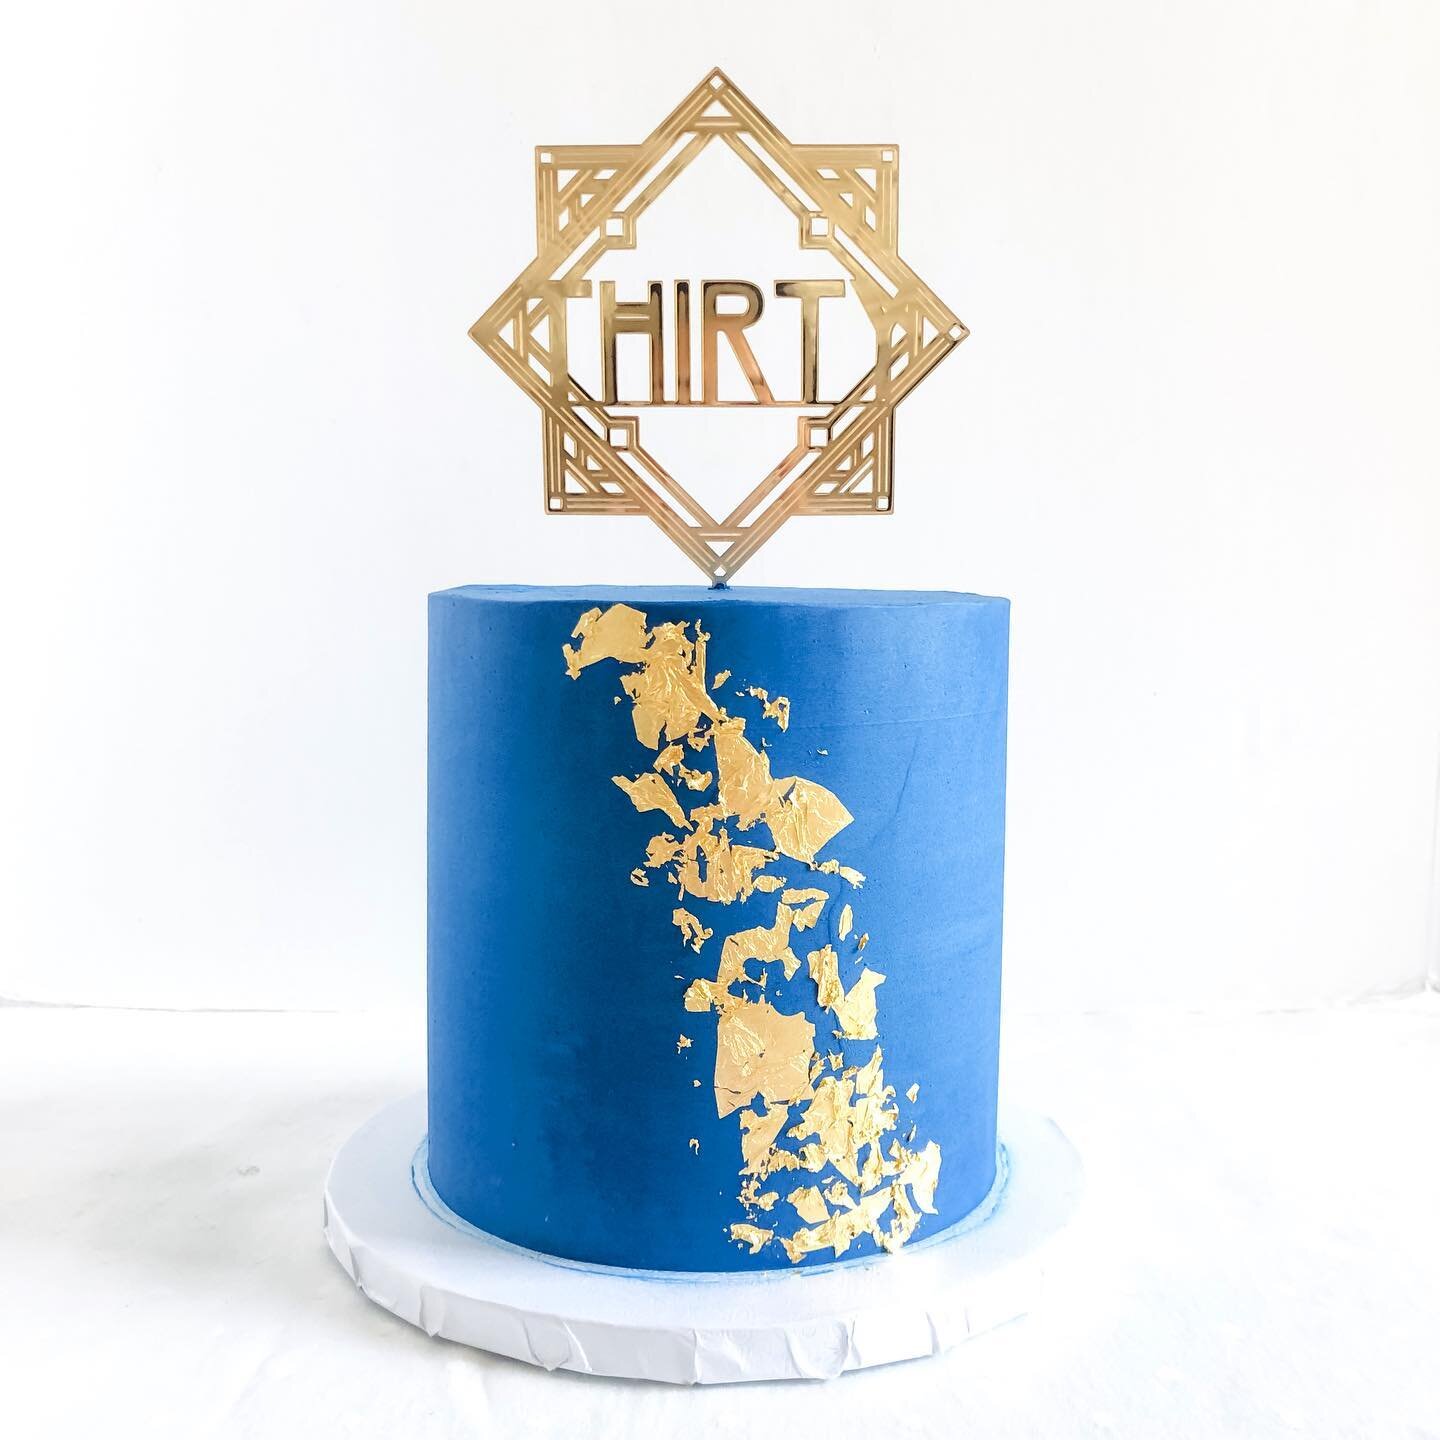 Blue and gold 💙💛

🎂: 6&rdquo; 4 layer green tea white chocolate
Topper: @shopaalvo 

Visit winkbyerica.com/contact to place a custom order inquiry. Custom orders typically require a 2 week lead time.

Need it quicker? Visit orderwinkbyerica.com to